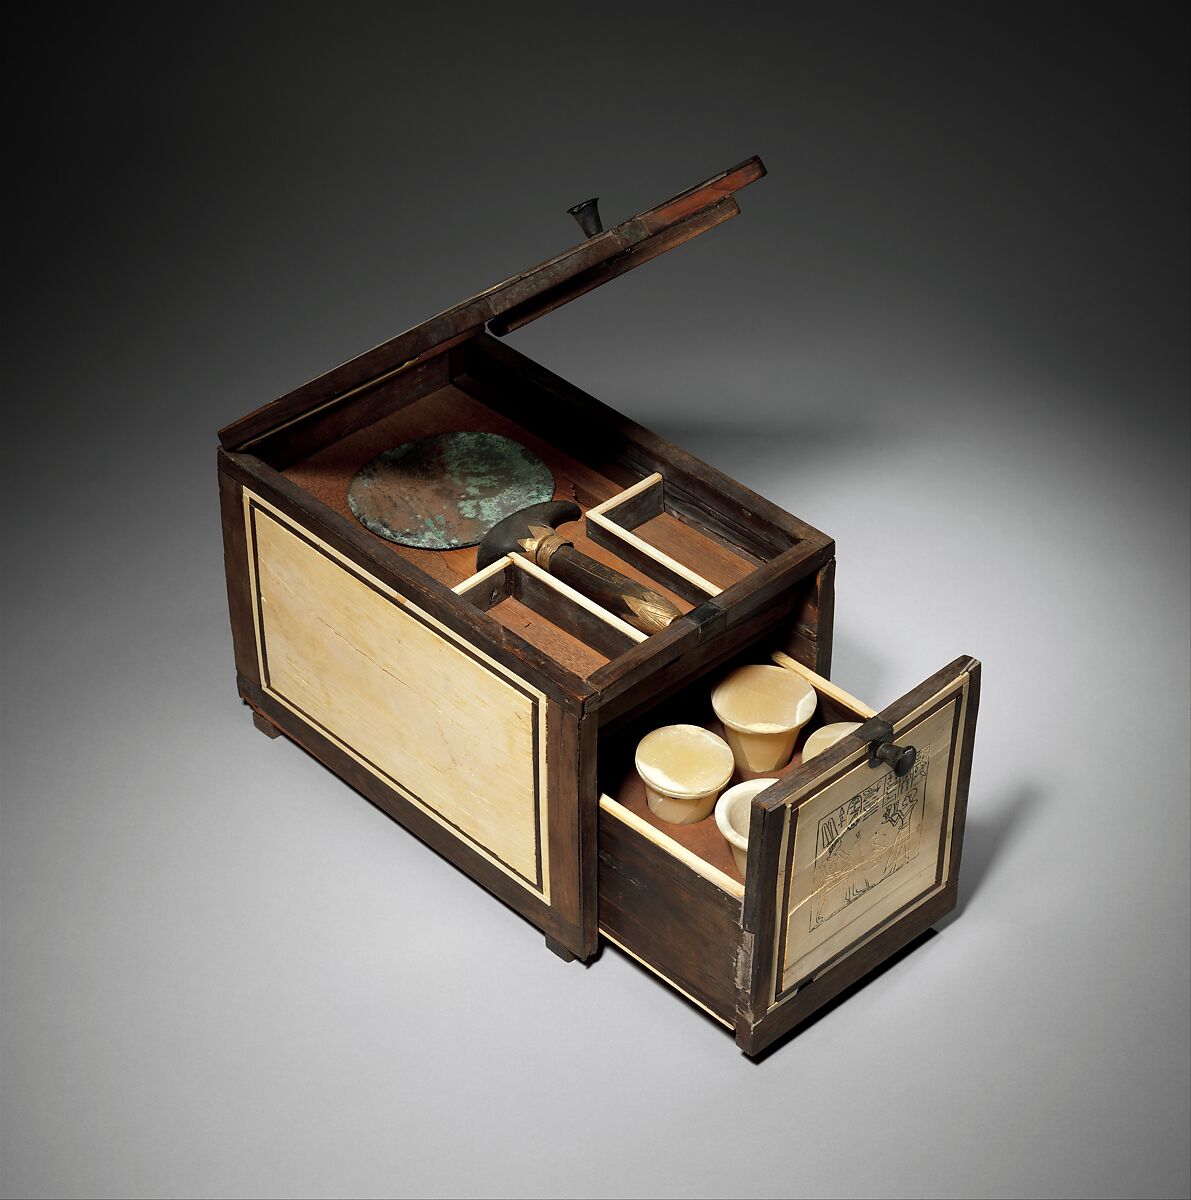 Cosmetic Box of Kemeni and Mirror of Reniseneb, Cedar, with ebony and ivory veneer and silver mounting 